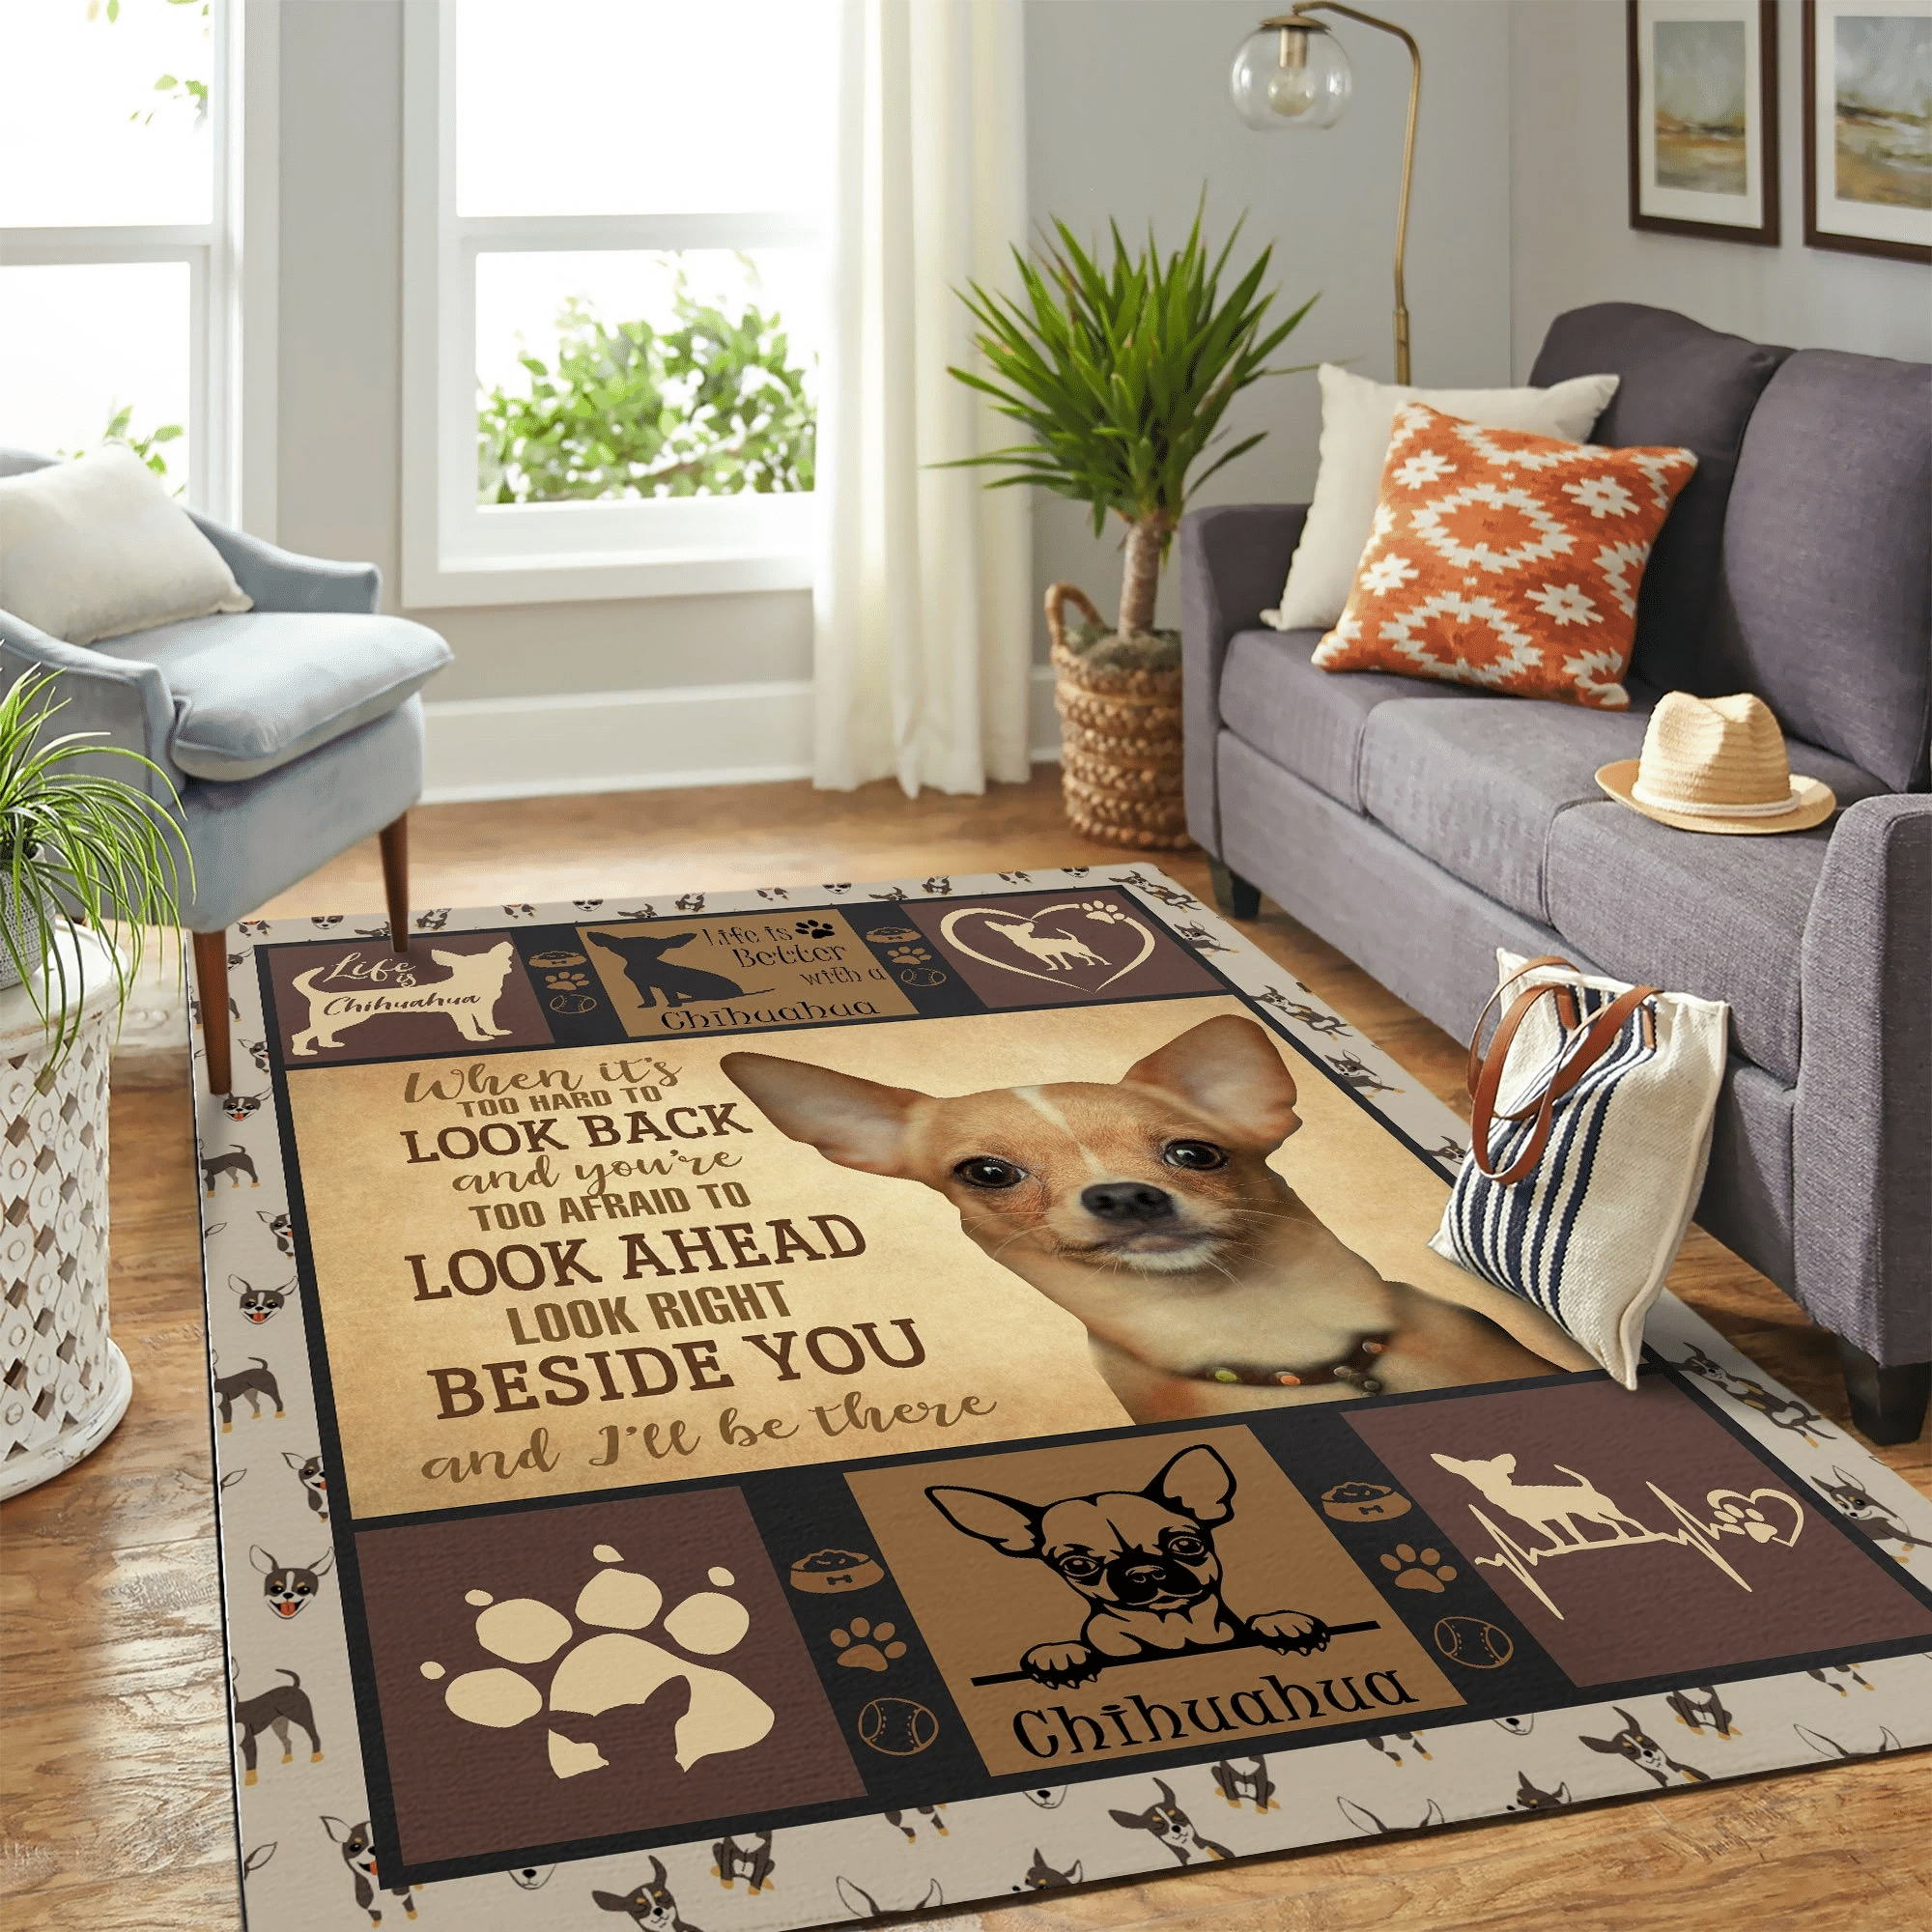 Chihuahua Vq Quilt Mk Carpet Area Rug Chrismas Gift - Indoor Outdoor Rugs 1